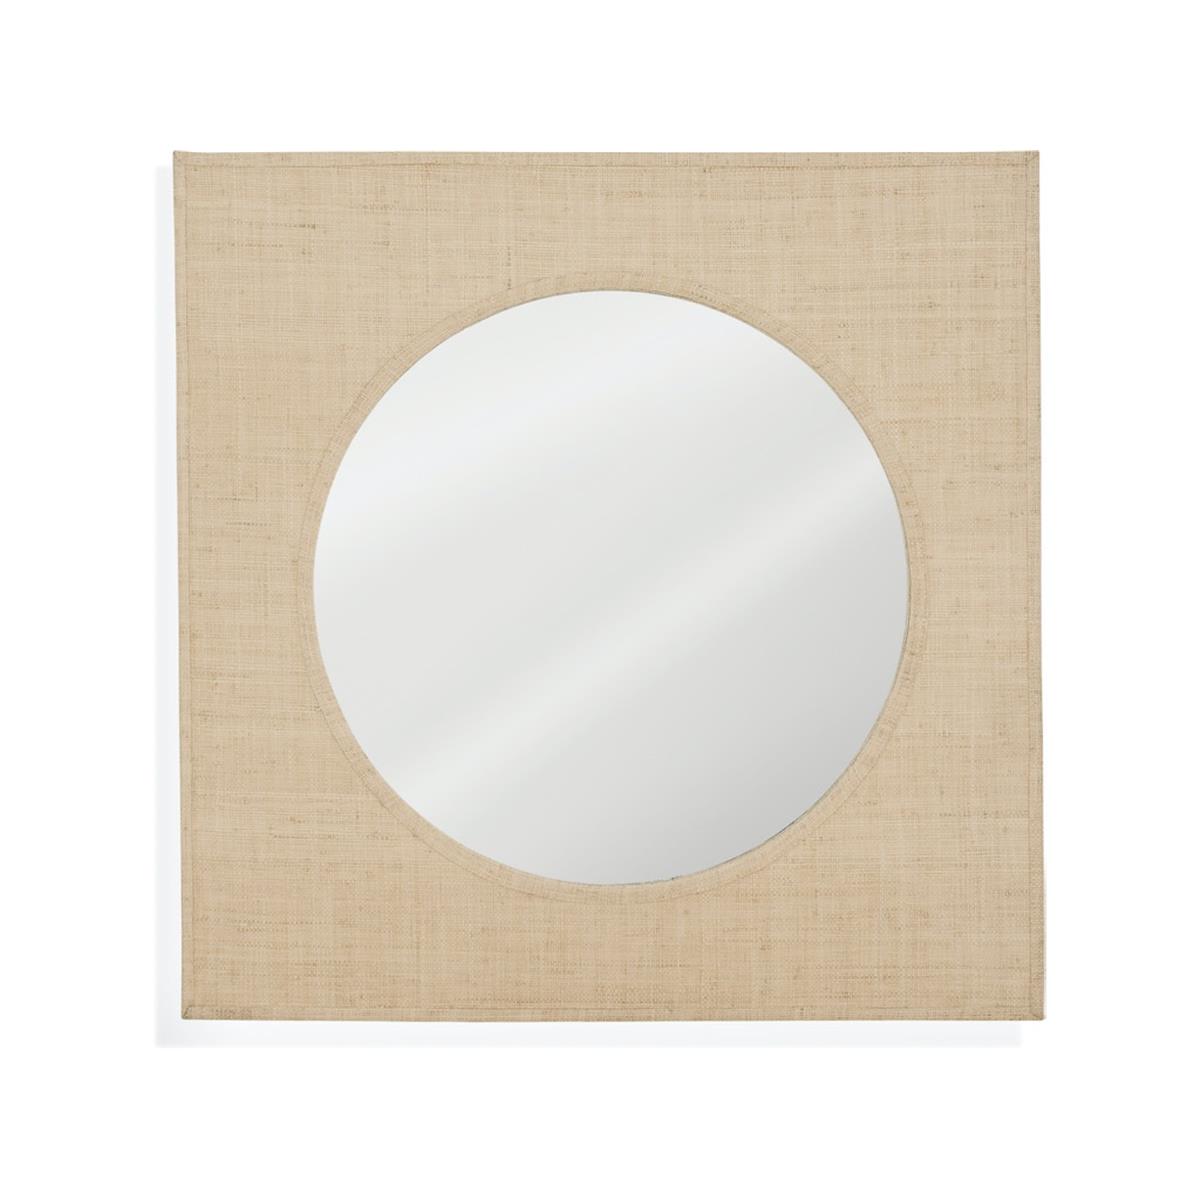 Picture of Bassett Mirror M4764EC Wall Mirror, Natural